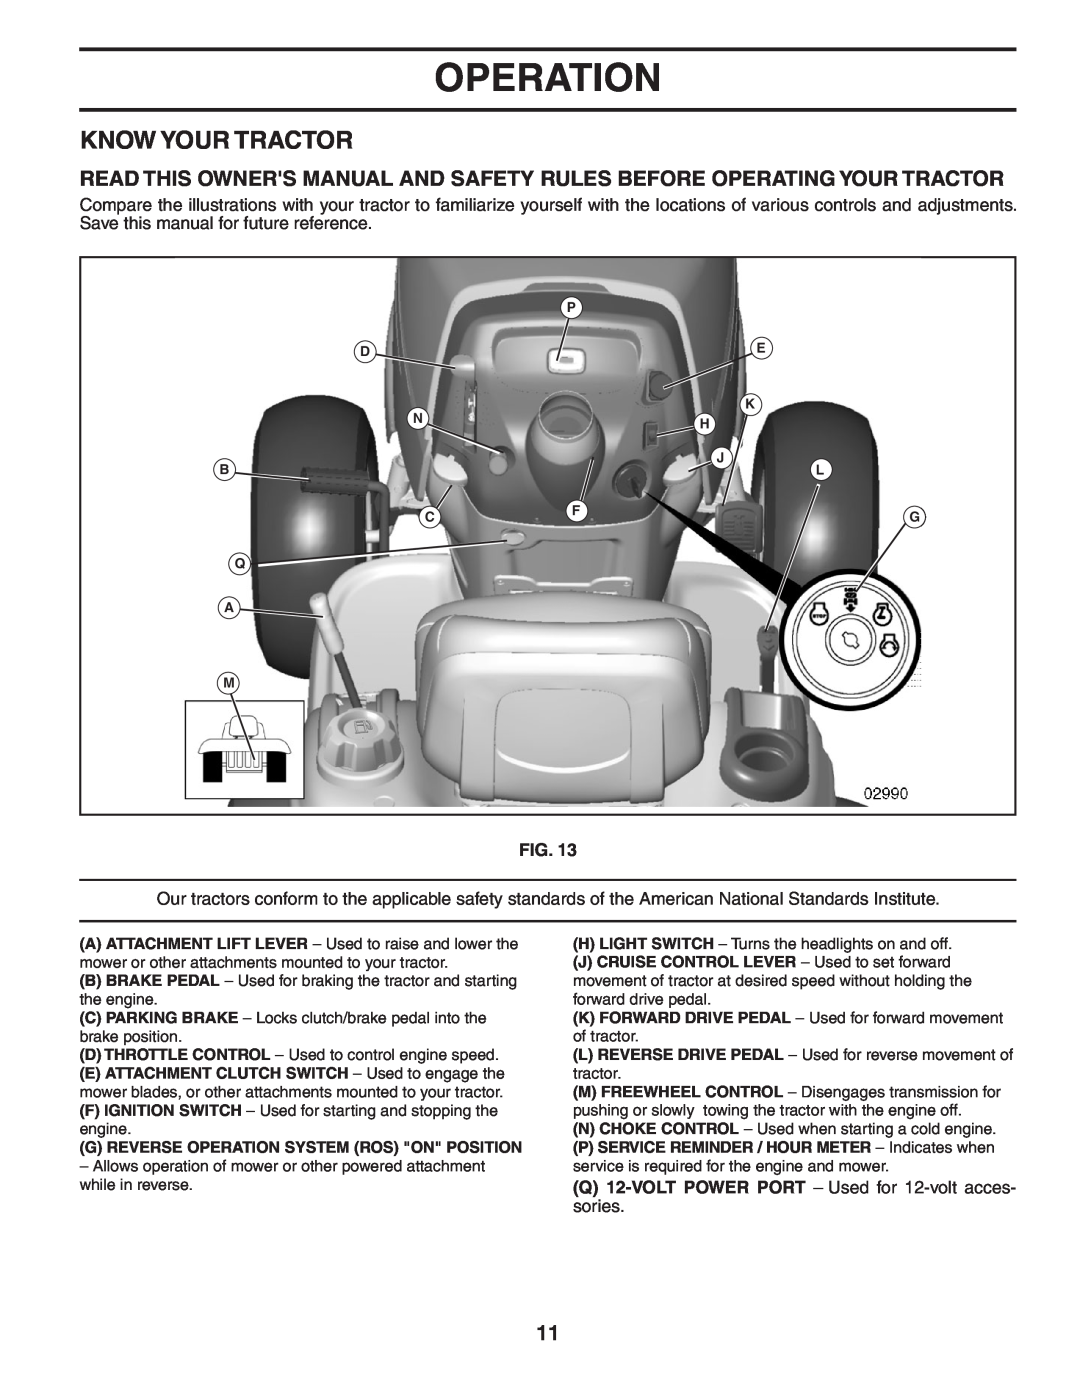 Poulan PBGT22H54 manual Know Your Tractor, Operation 